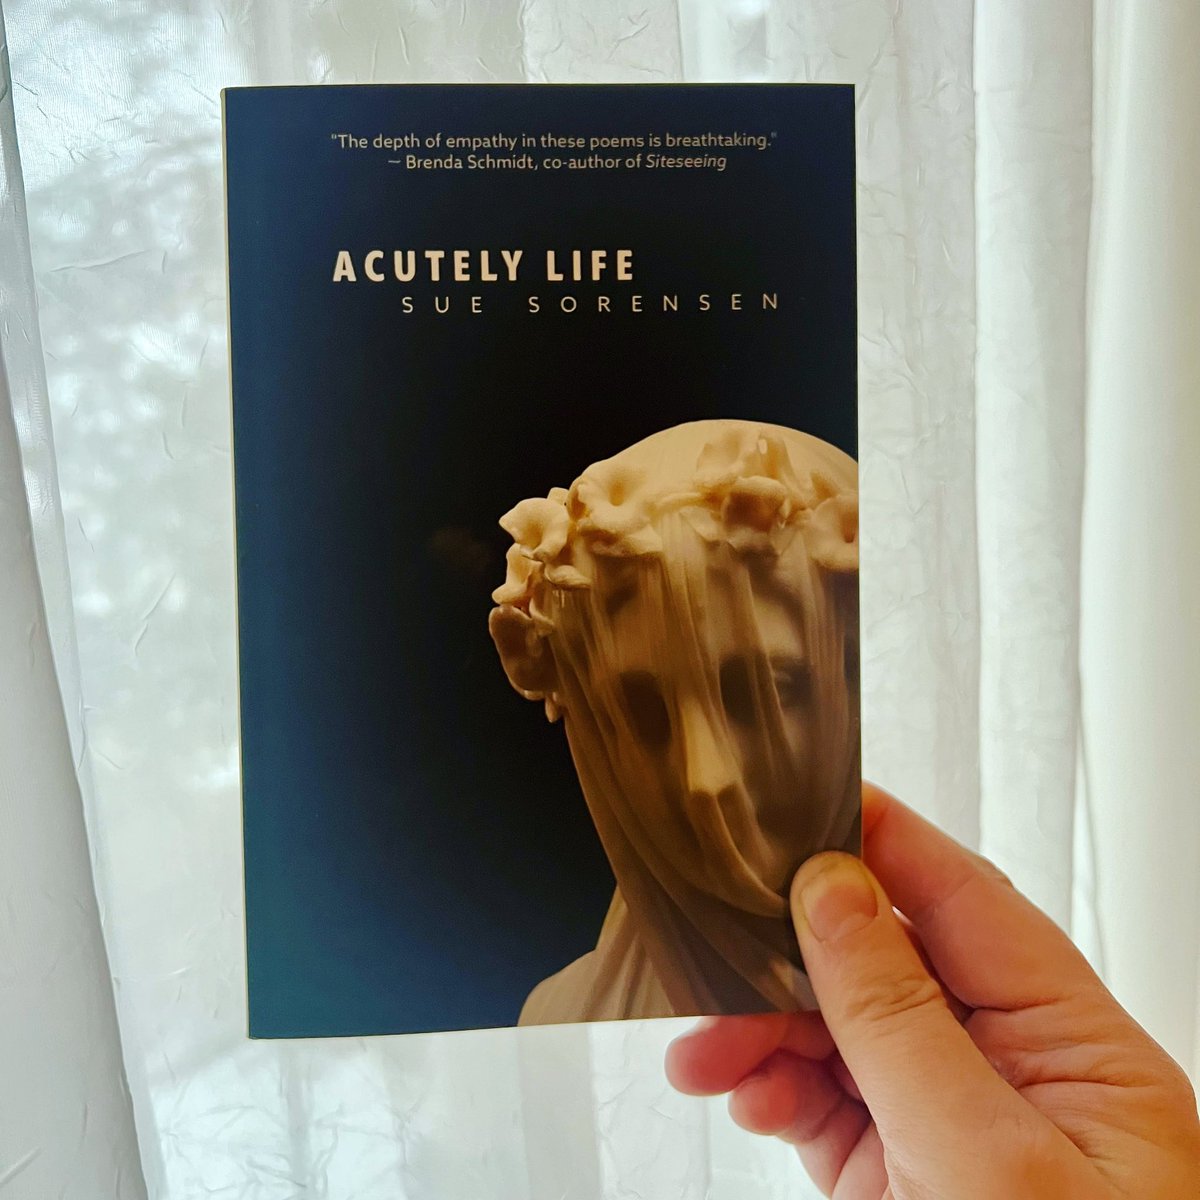 I’m looking forward to spending some time with Sue Sorensen’s first poetry book, Acutely Life (@atbaypress). Sue is a great friend and now she is a pressmate! I am ALSO looking forward to hosting her launch March 22 at @mcnallyrobinson.